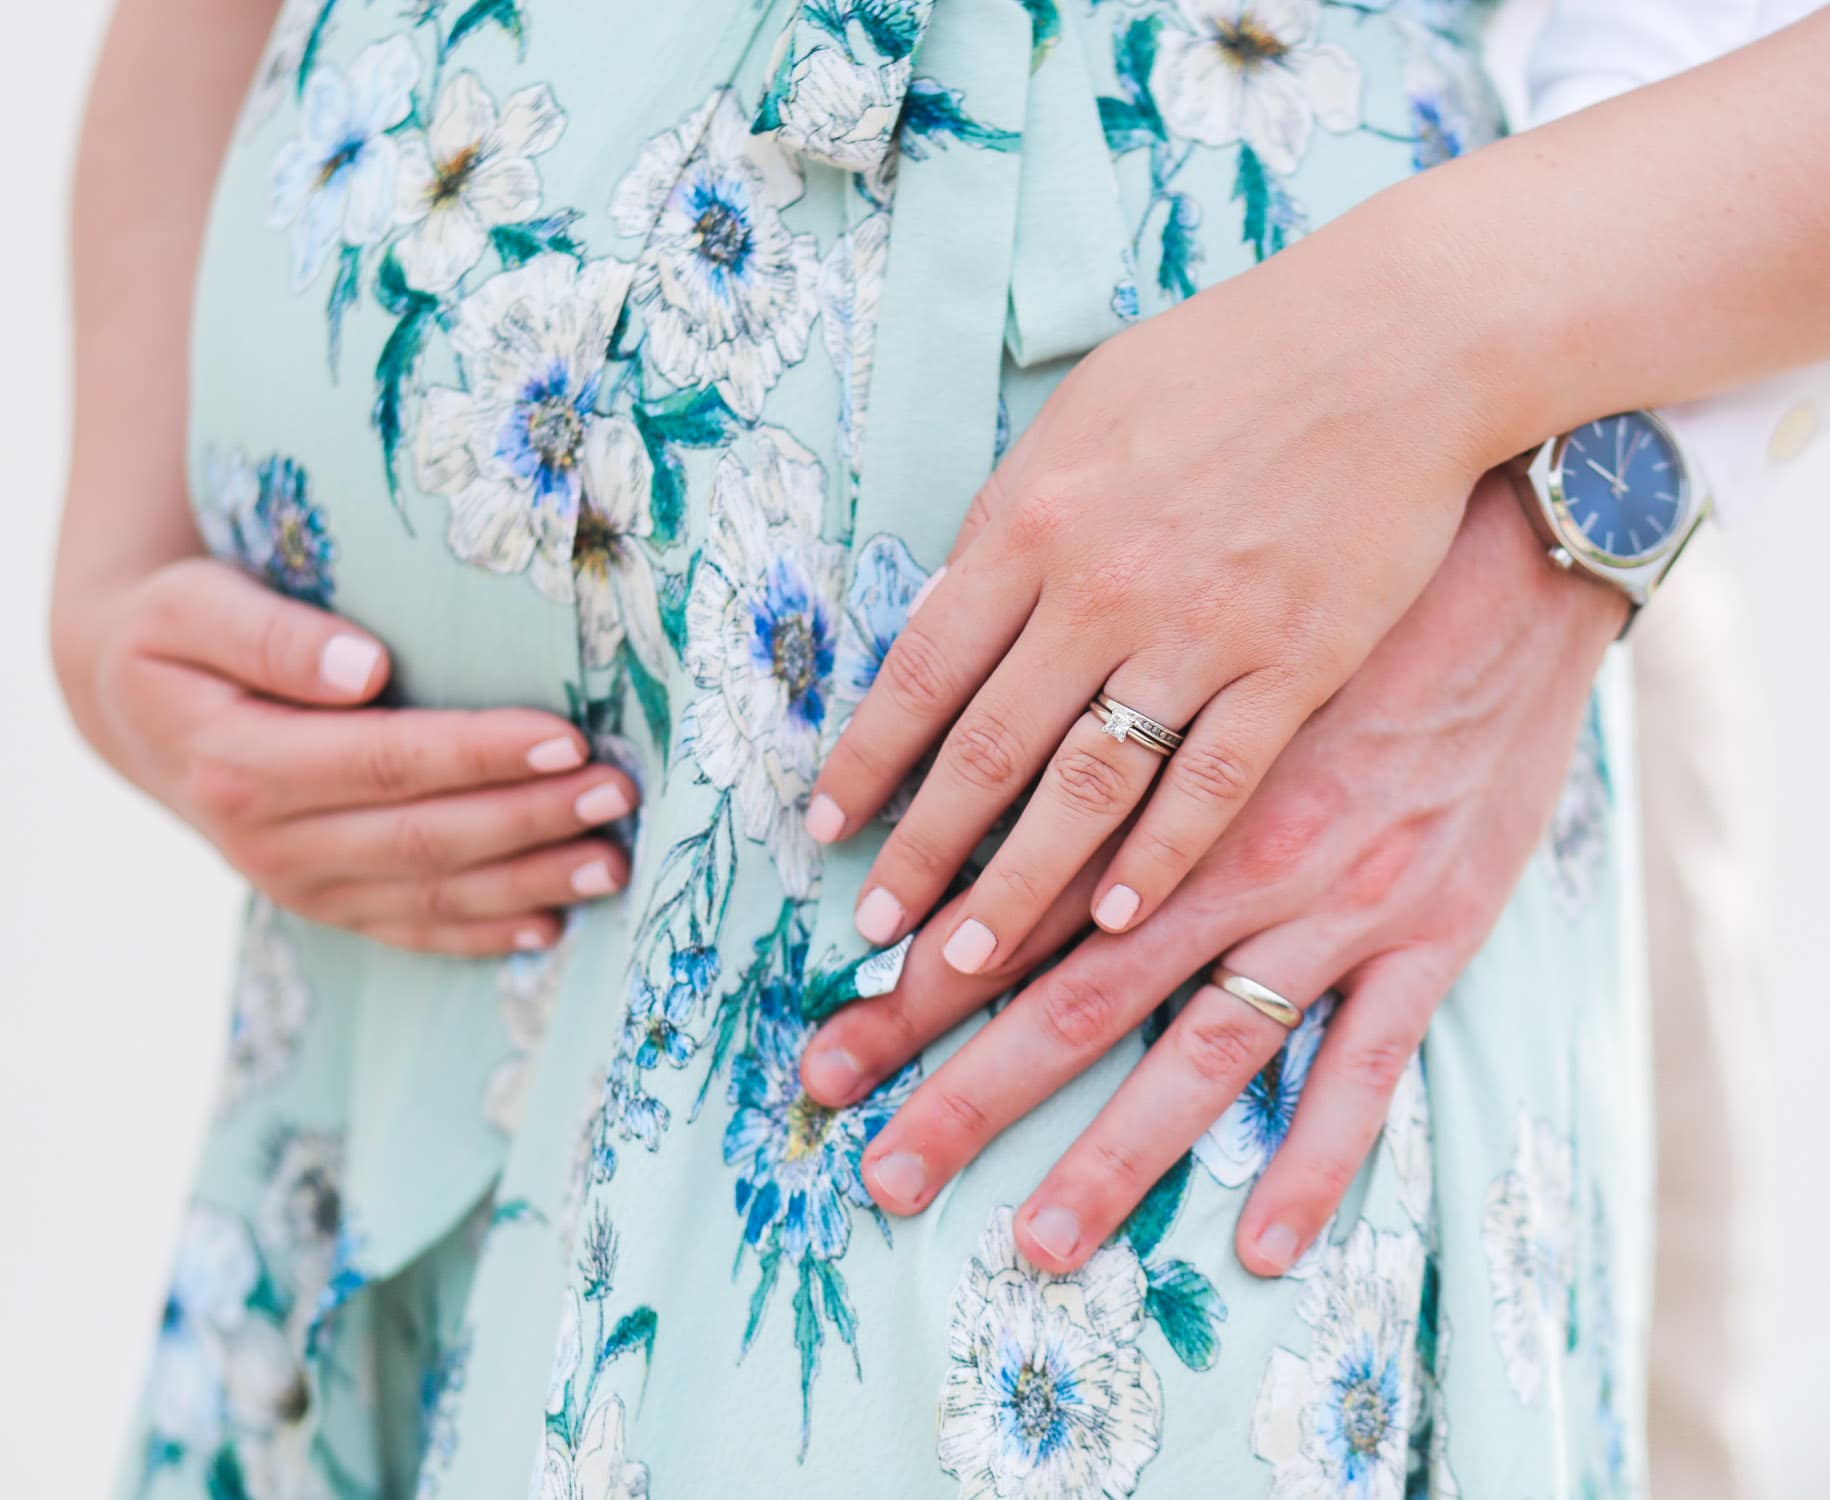 OPI Pretty Pink Perseveres baby pink nail polish | Cute pregnancy announcement photo idea | Rose gold Oh Baby balloons | ASTR pale green floral wrap dress | Flattering maternity dress | Florida beauty and fashion blogger Ashley Brooke Nicholas